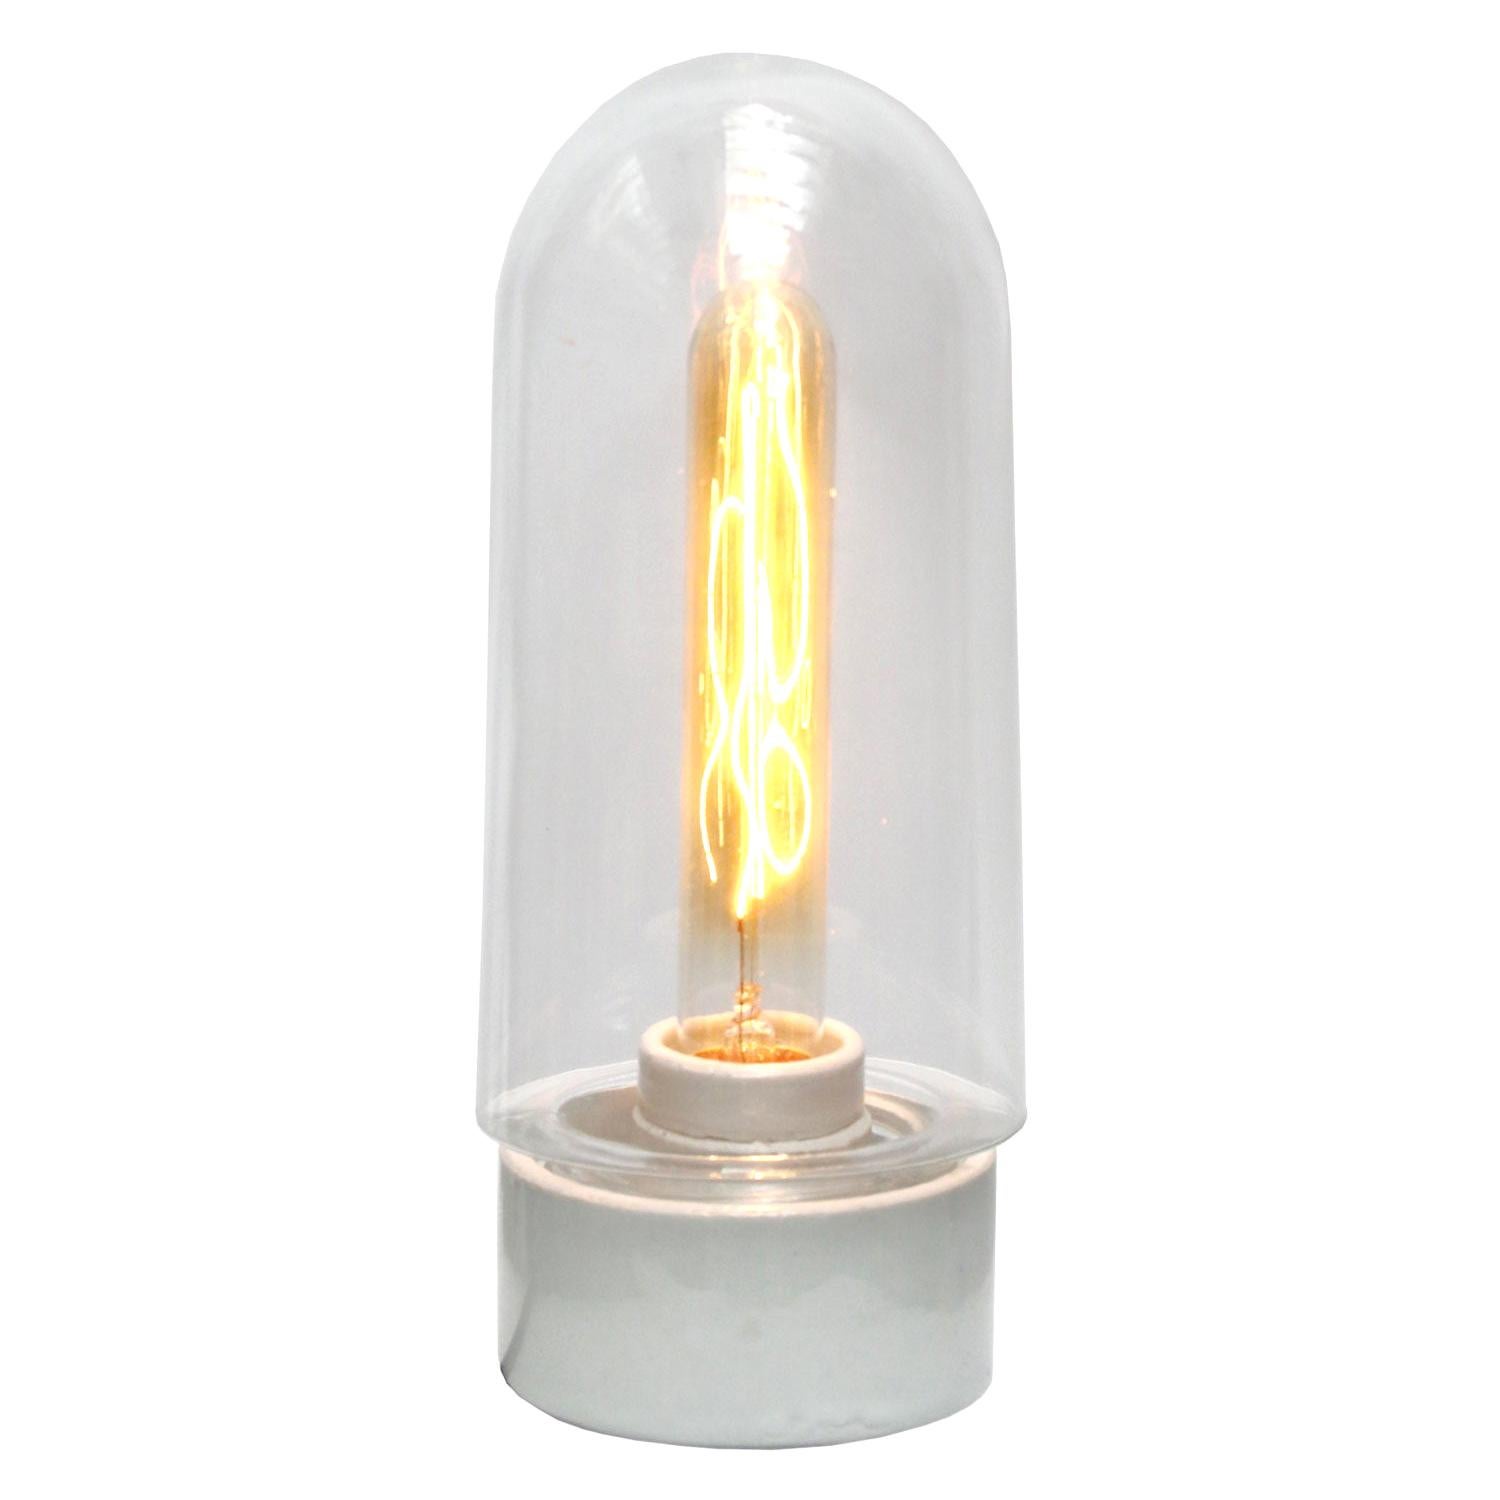 Industrial wall lamp scone. White porcelain. Clear glass.

2 conductors, no ground.
Measures: Diameter foot 10 cm
Suitable for 110 volt USA
new wiring is CE certified (220 volt)  or UL Listed (110 volt) 

Weight: 1.0 kg / 2.2 lb

Priced per